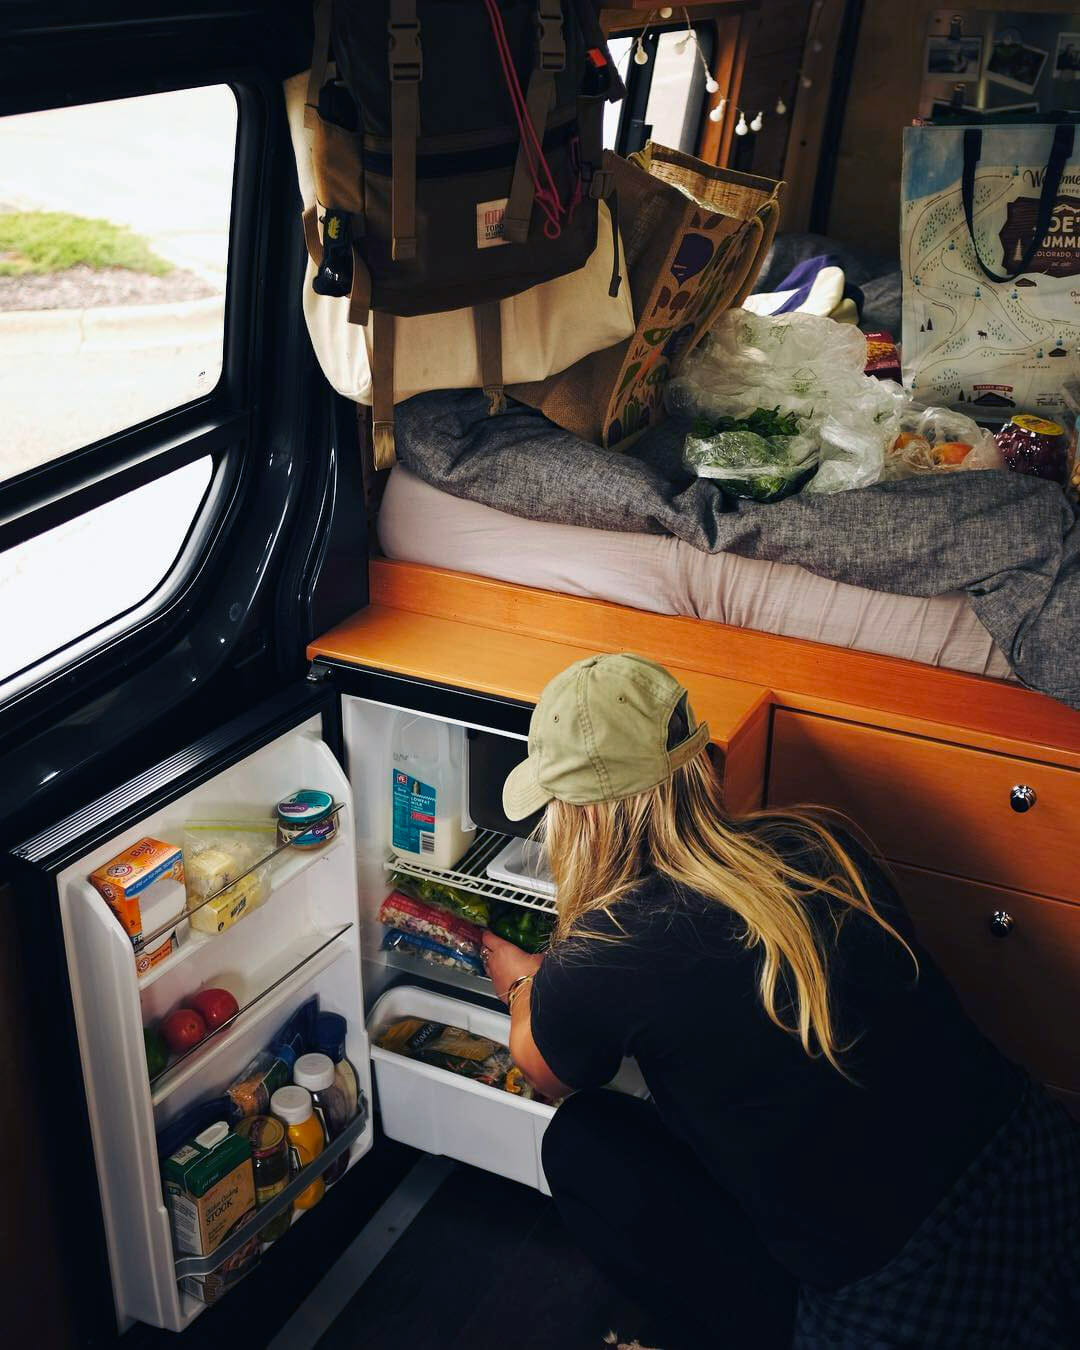 Keeping food cold using a 12v refrigerator in a campervan conversion